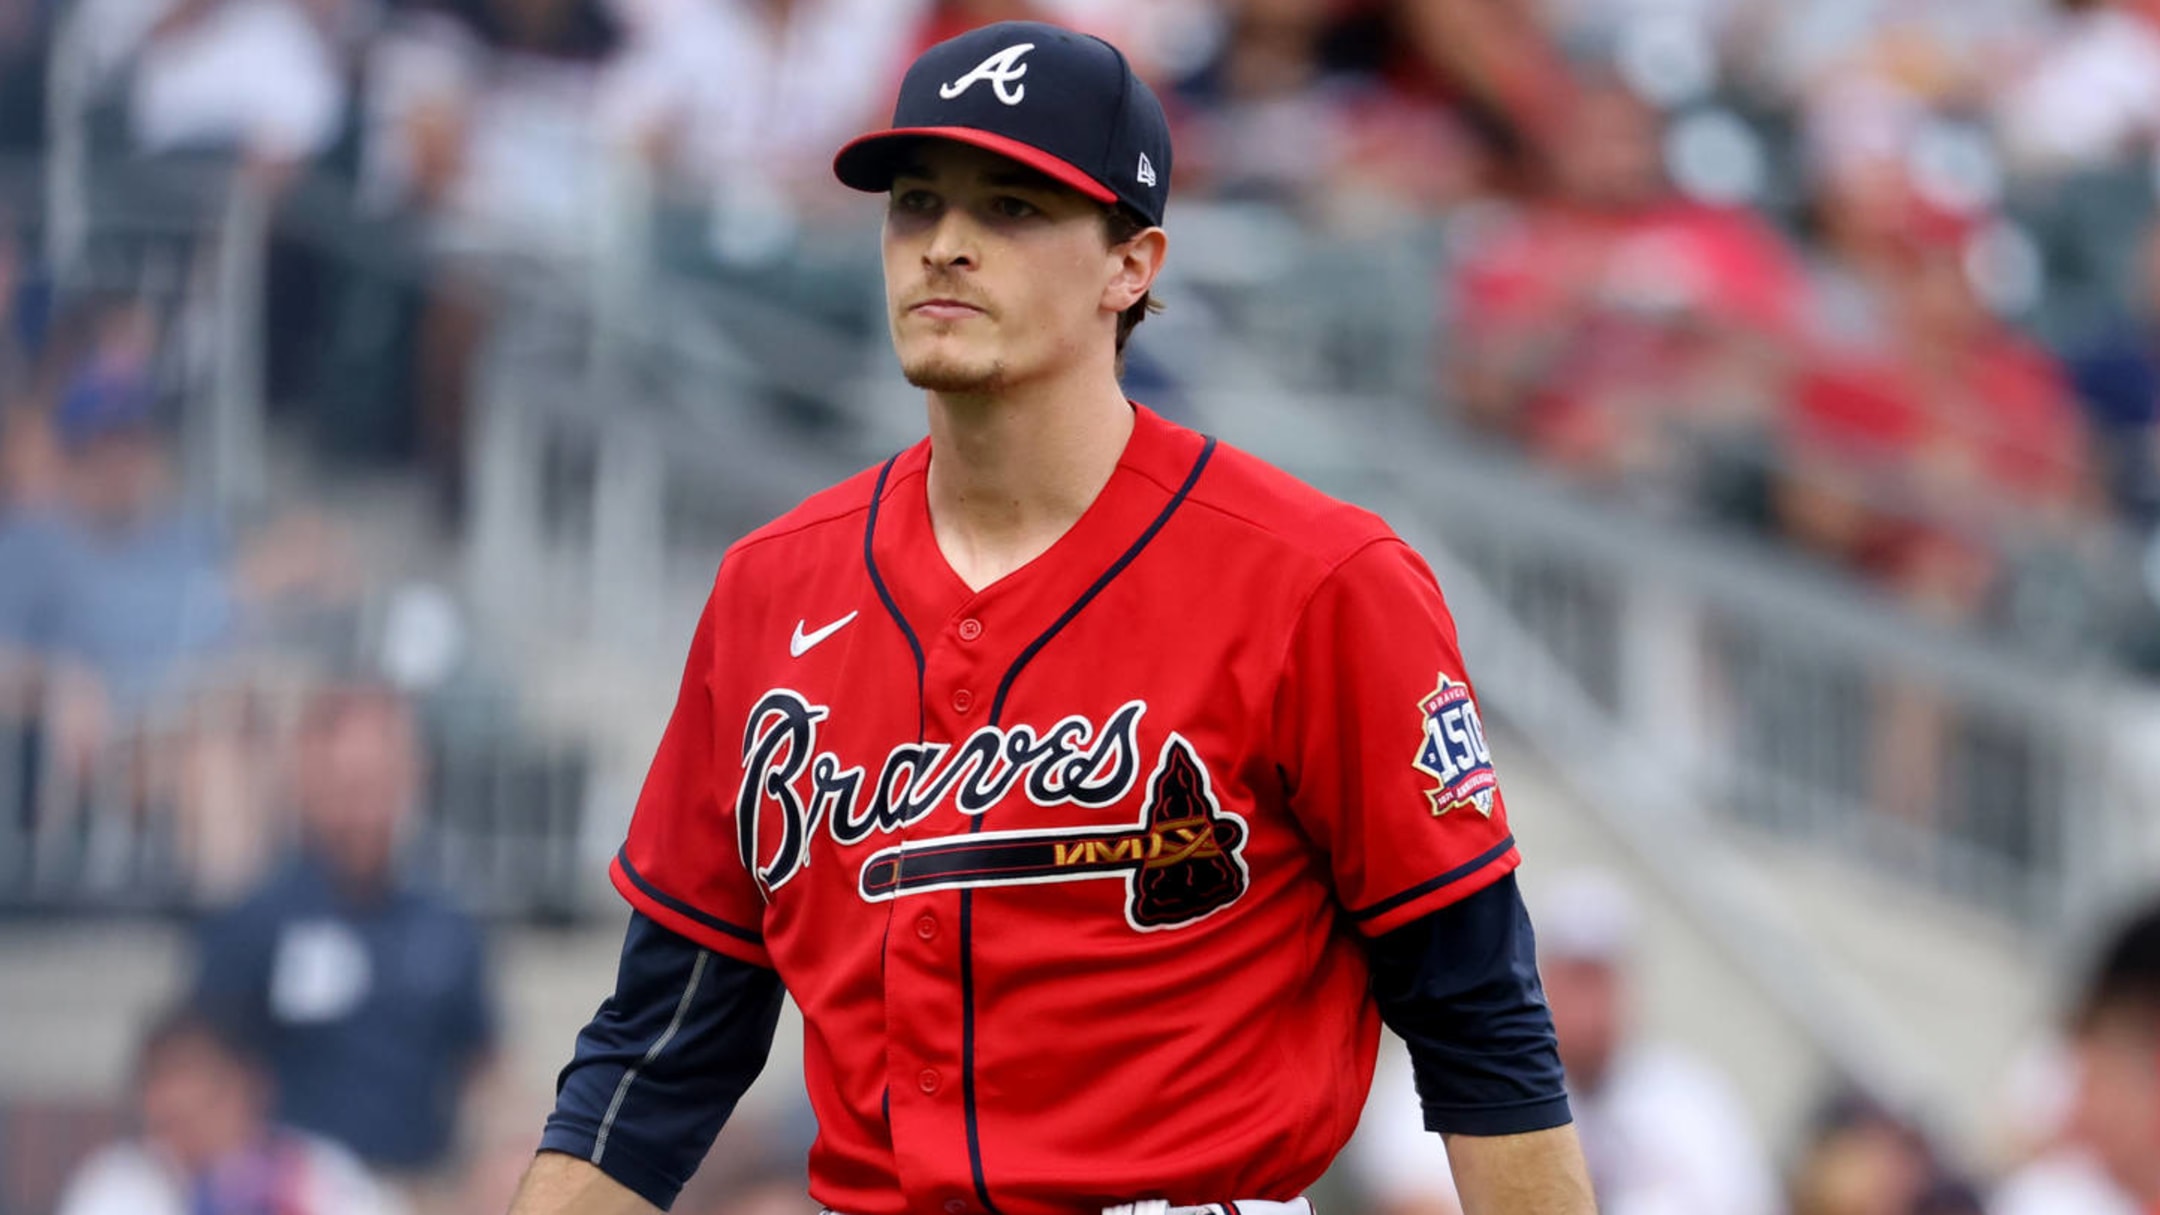 Braves lose ace Max Fried to worrying head injury